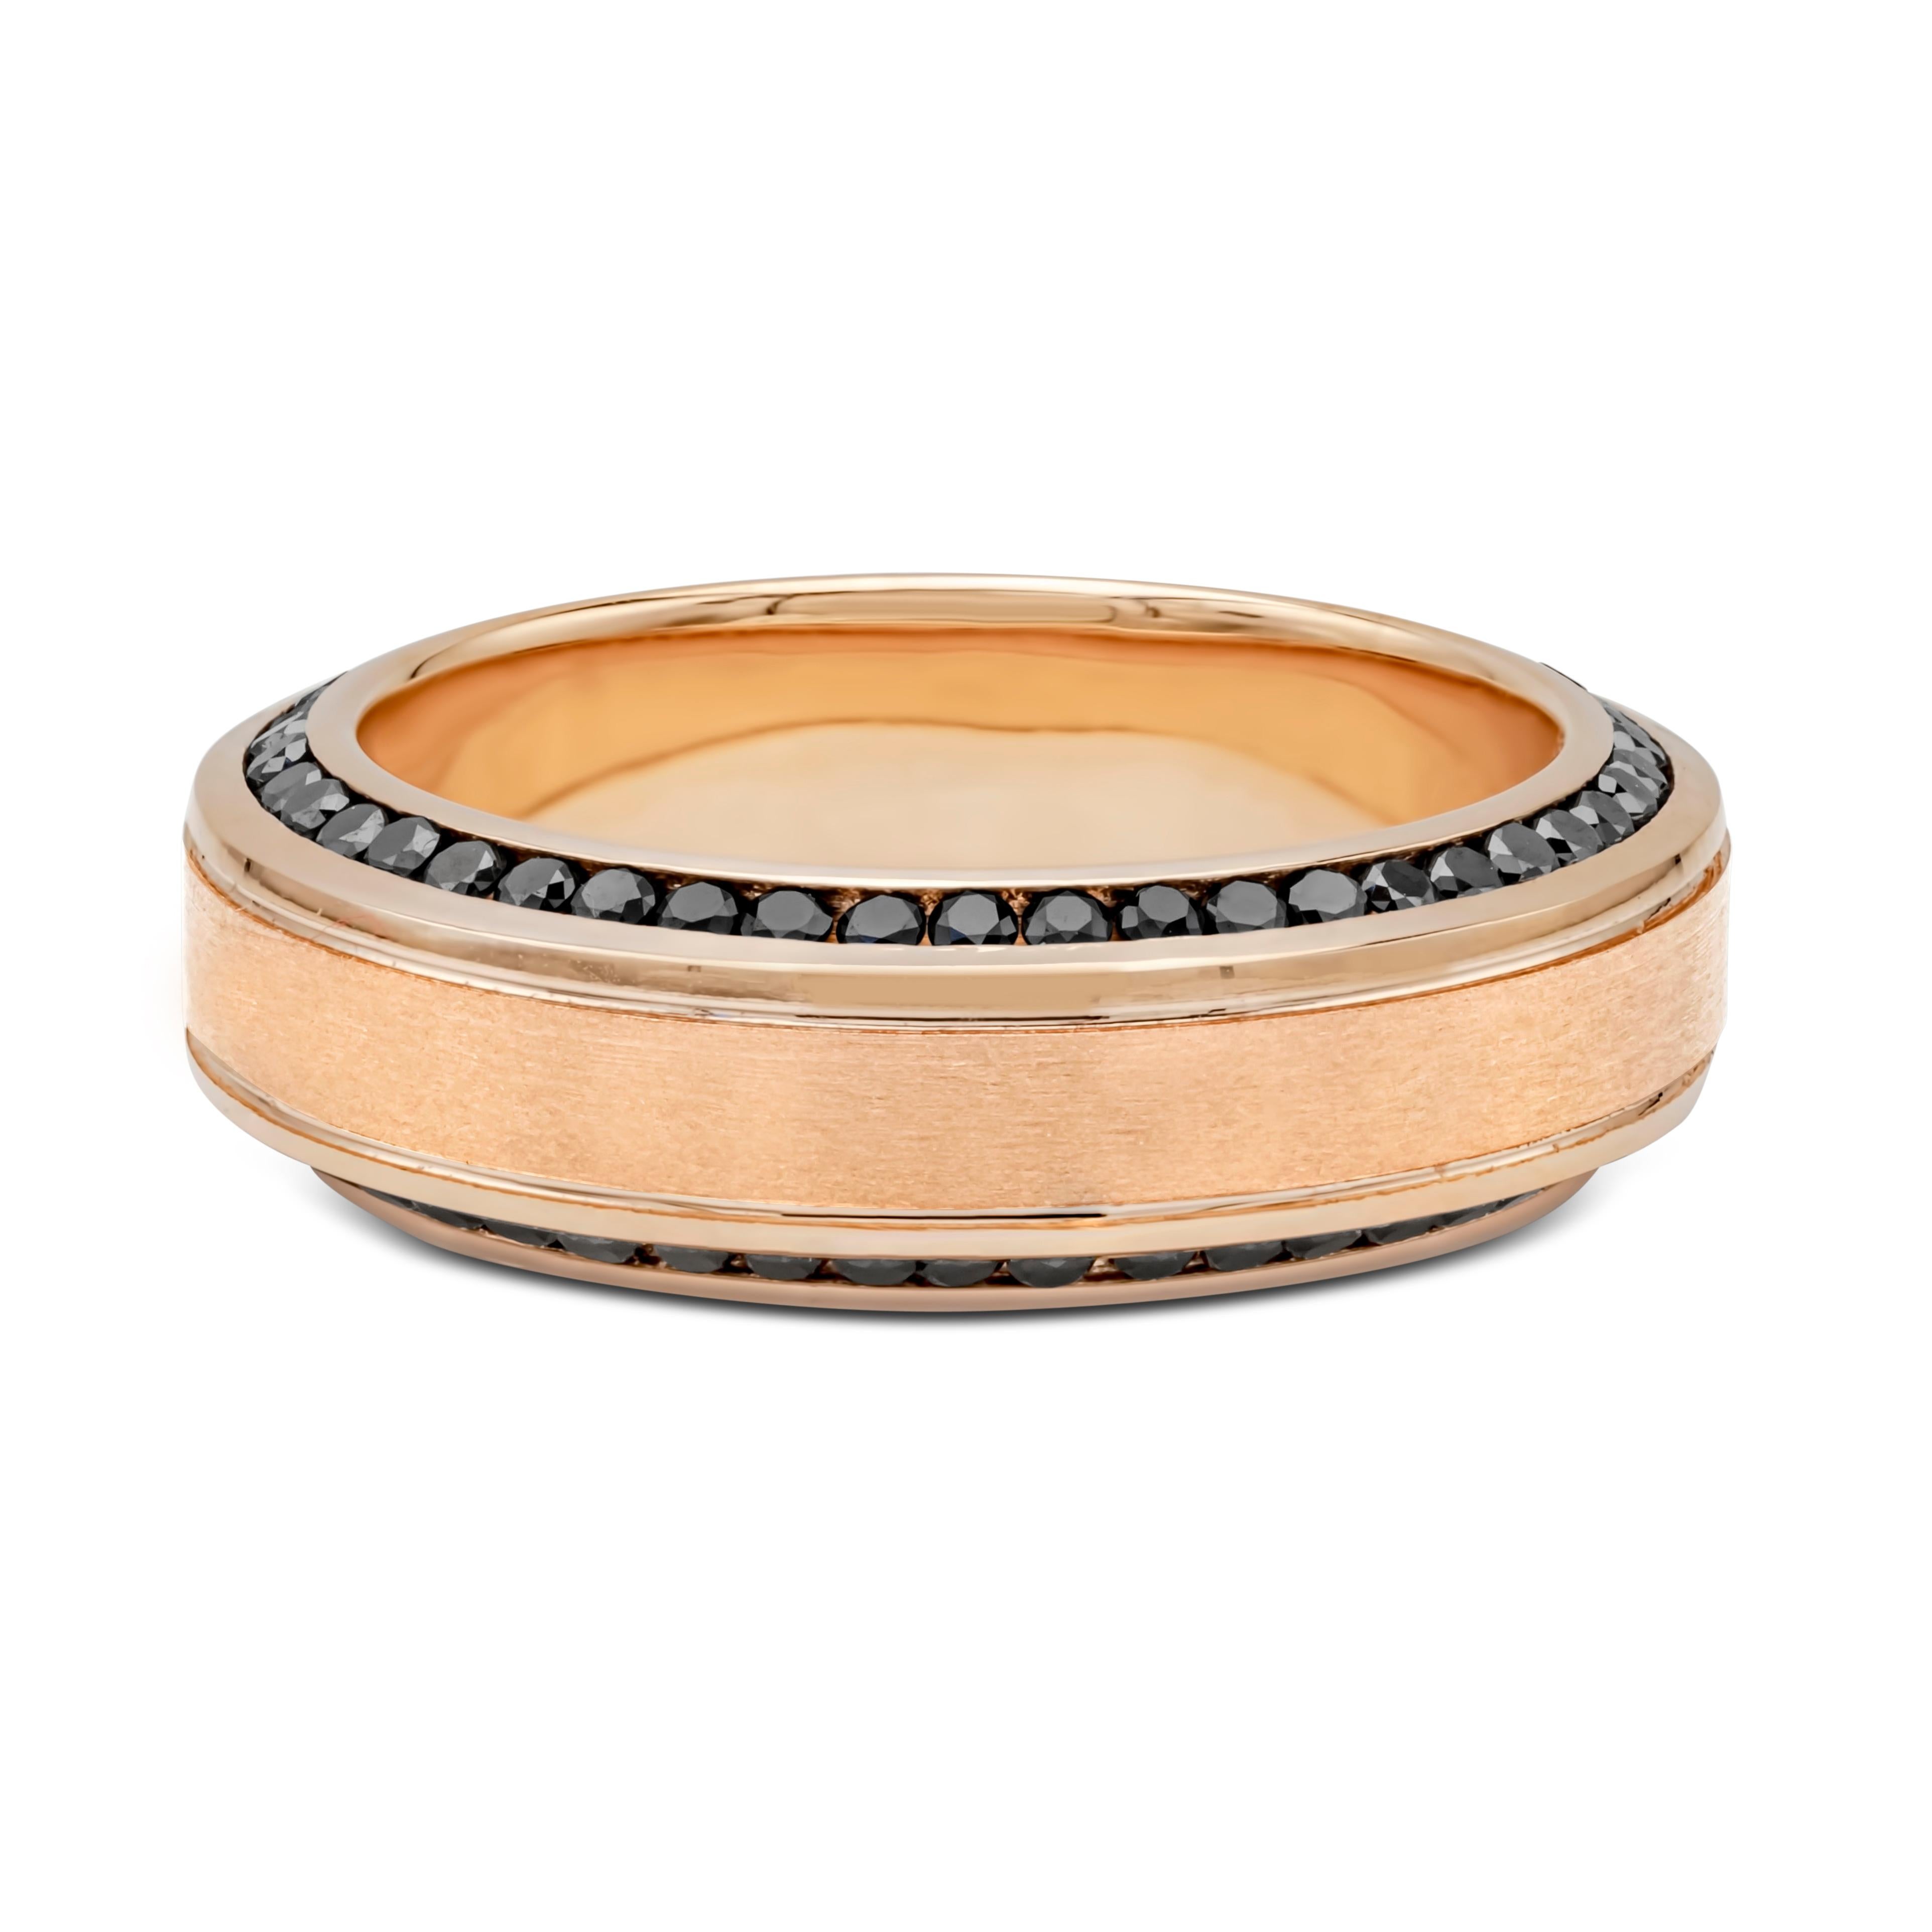 A comfort fit wedding band wrapped with black diamonds weighing 1.32 carats total; channel set on each side of the ring. Two lines finely-engraved in the middle portion of the ring and made in 18k rose gold. Gorgeous brushed inlay finish. Size 10